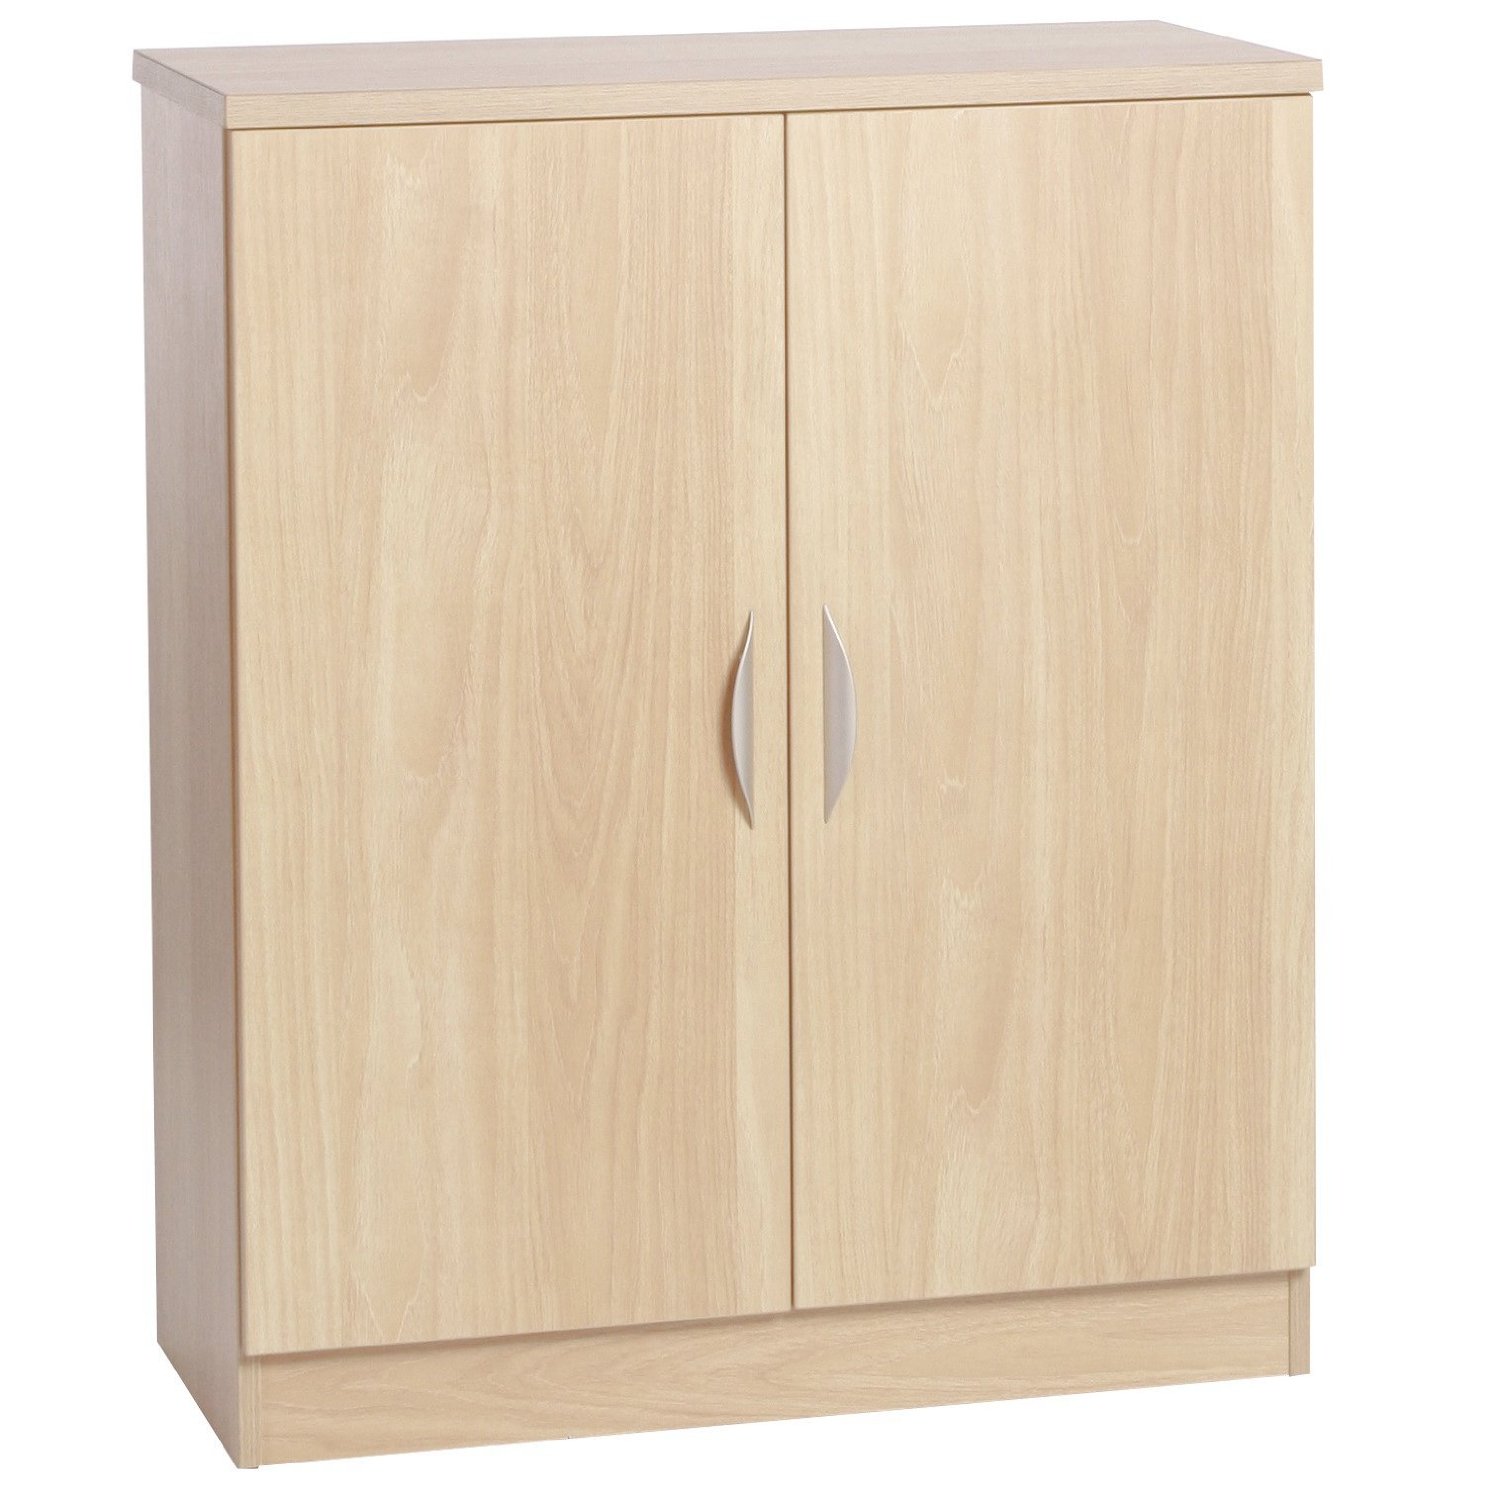 Mid Height Cupboard 850mm Wide